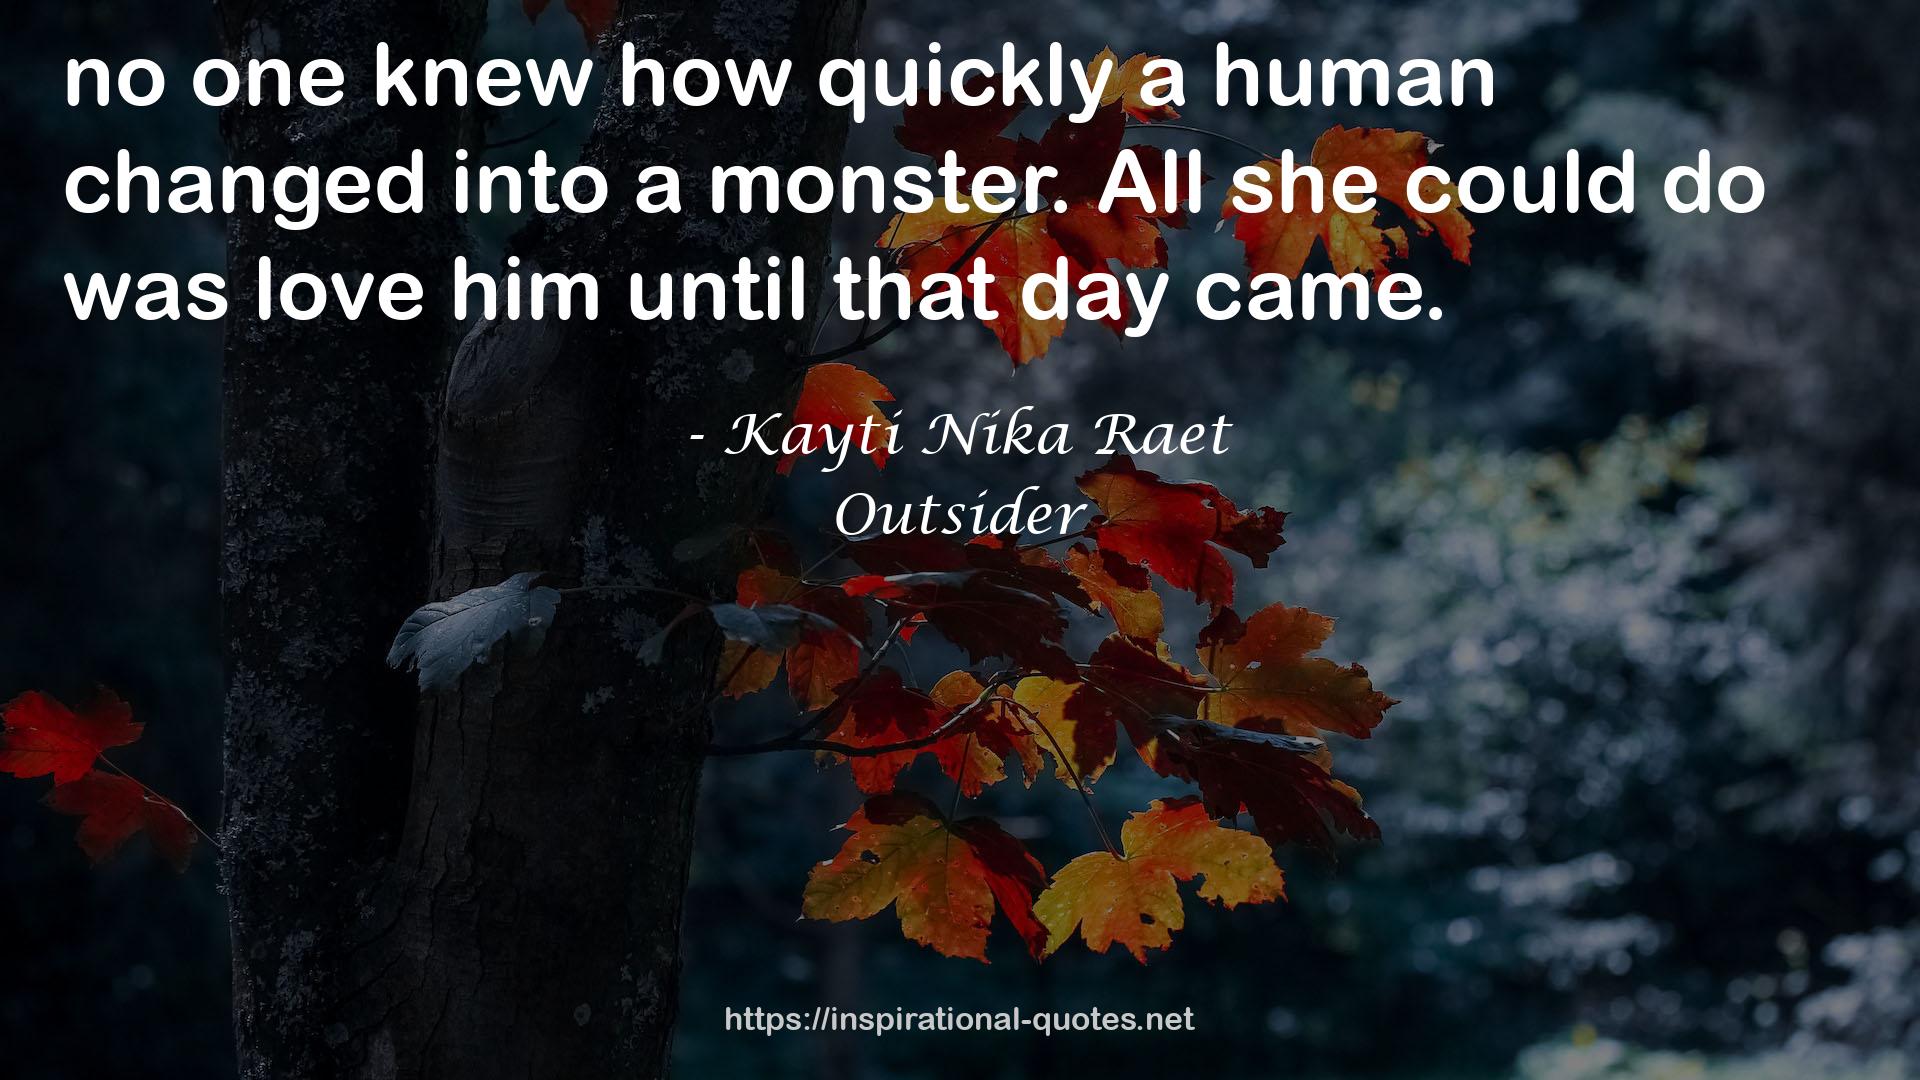 Outsider QUOTES